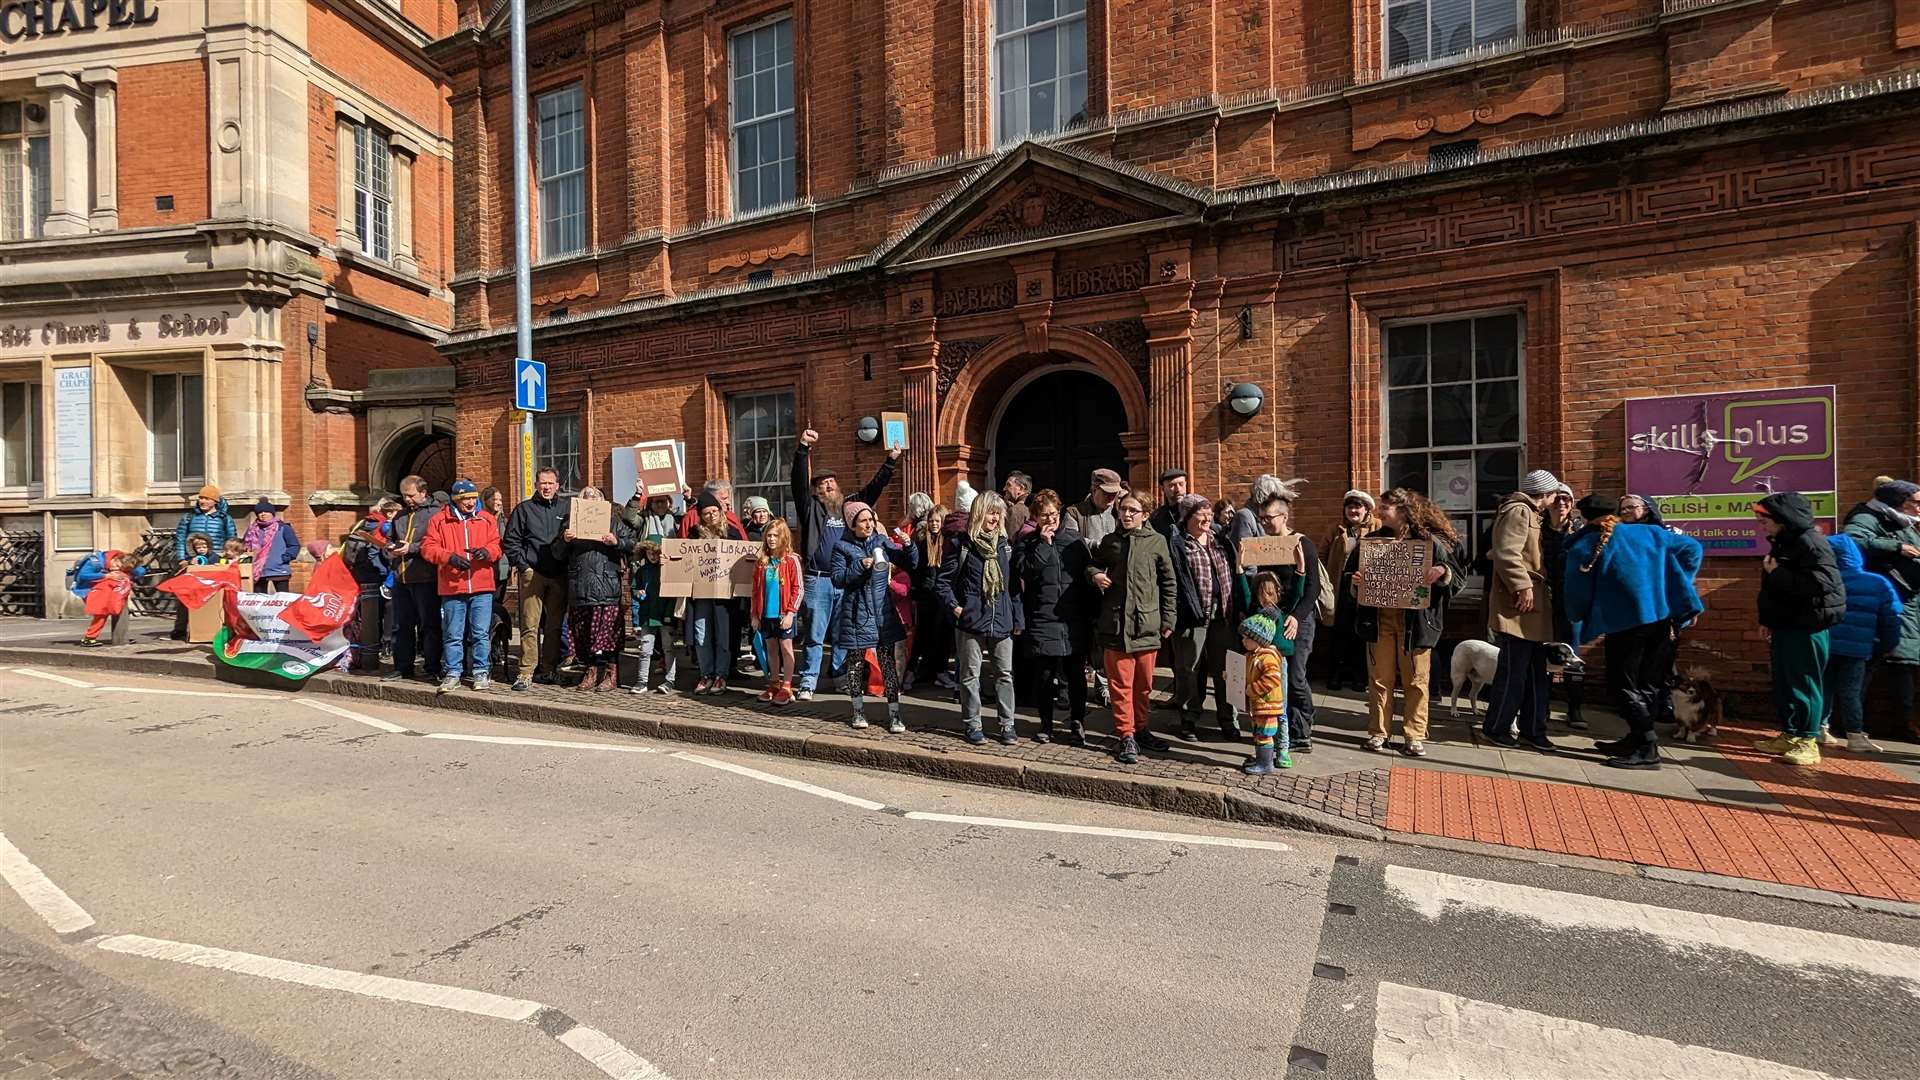 Folkestone residents gathered outside the library last Saturday to protest its closure